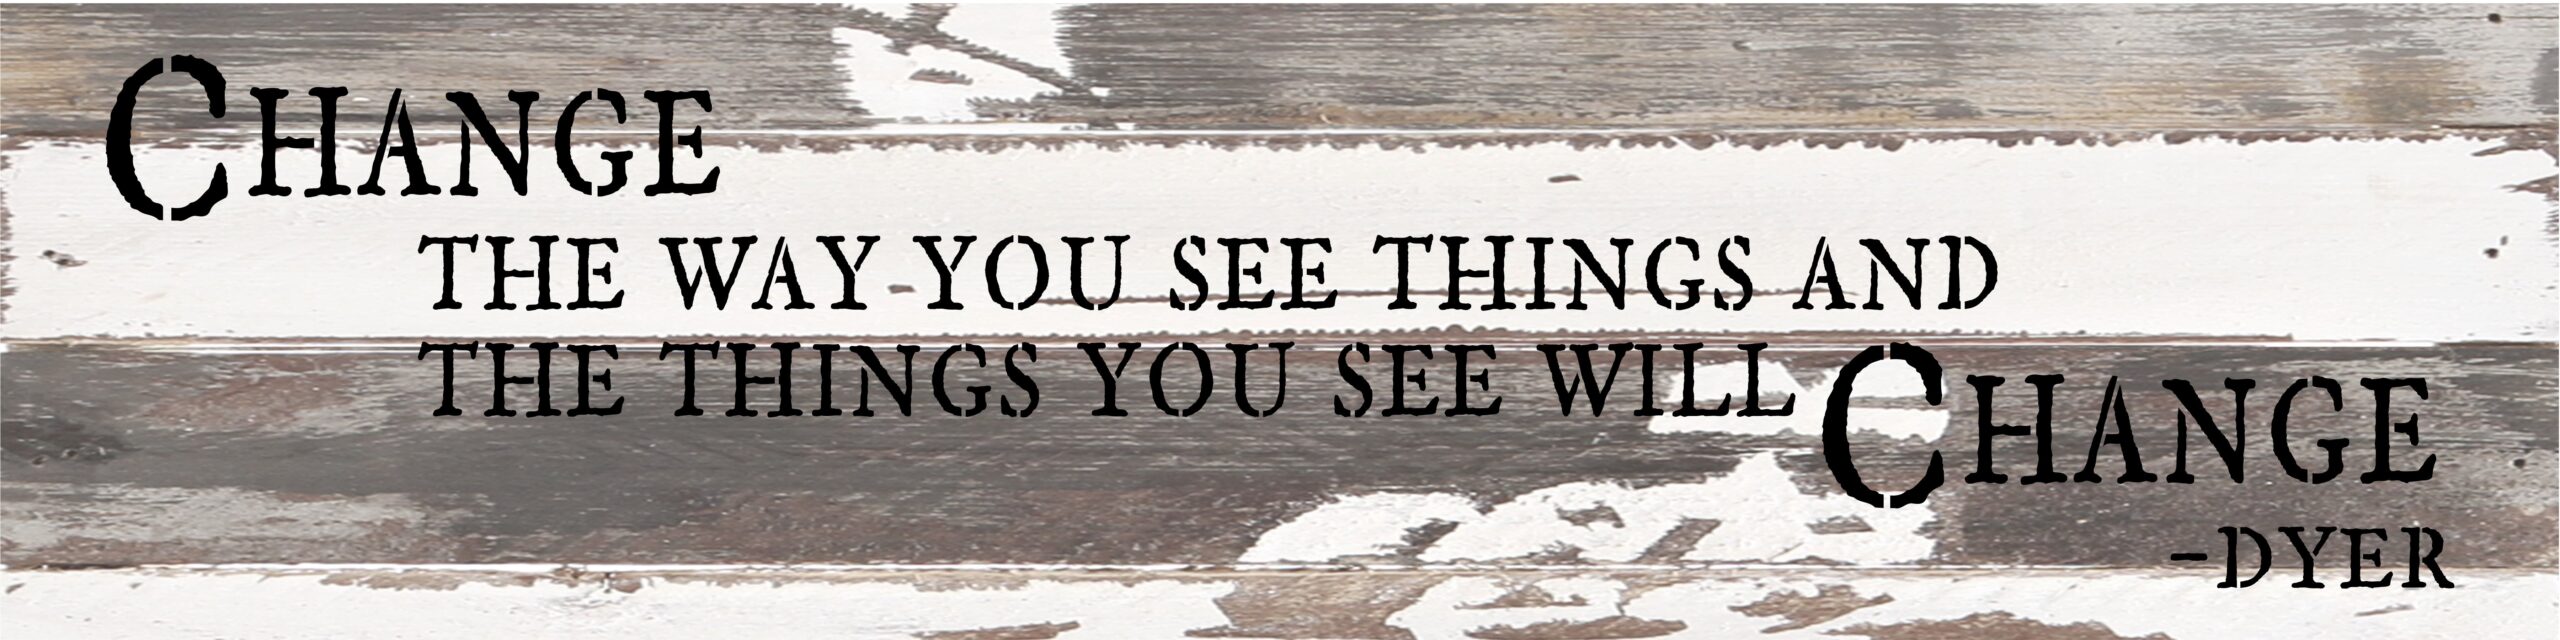 Change the way you see things and the things you see will change. - Dyer / 24x6 Reclaimed Wood Wall Art